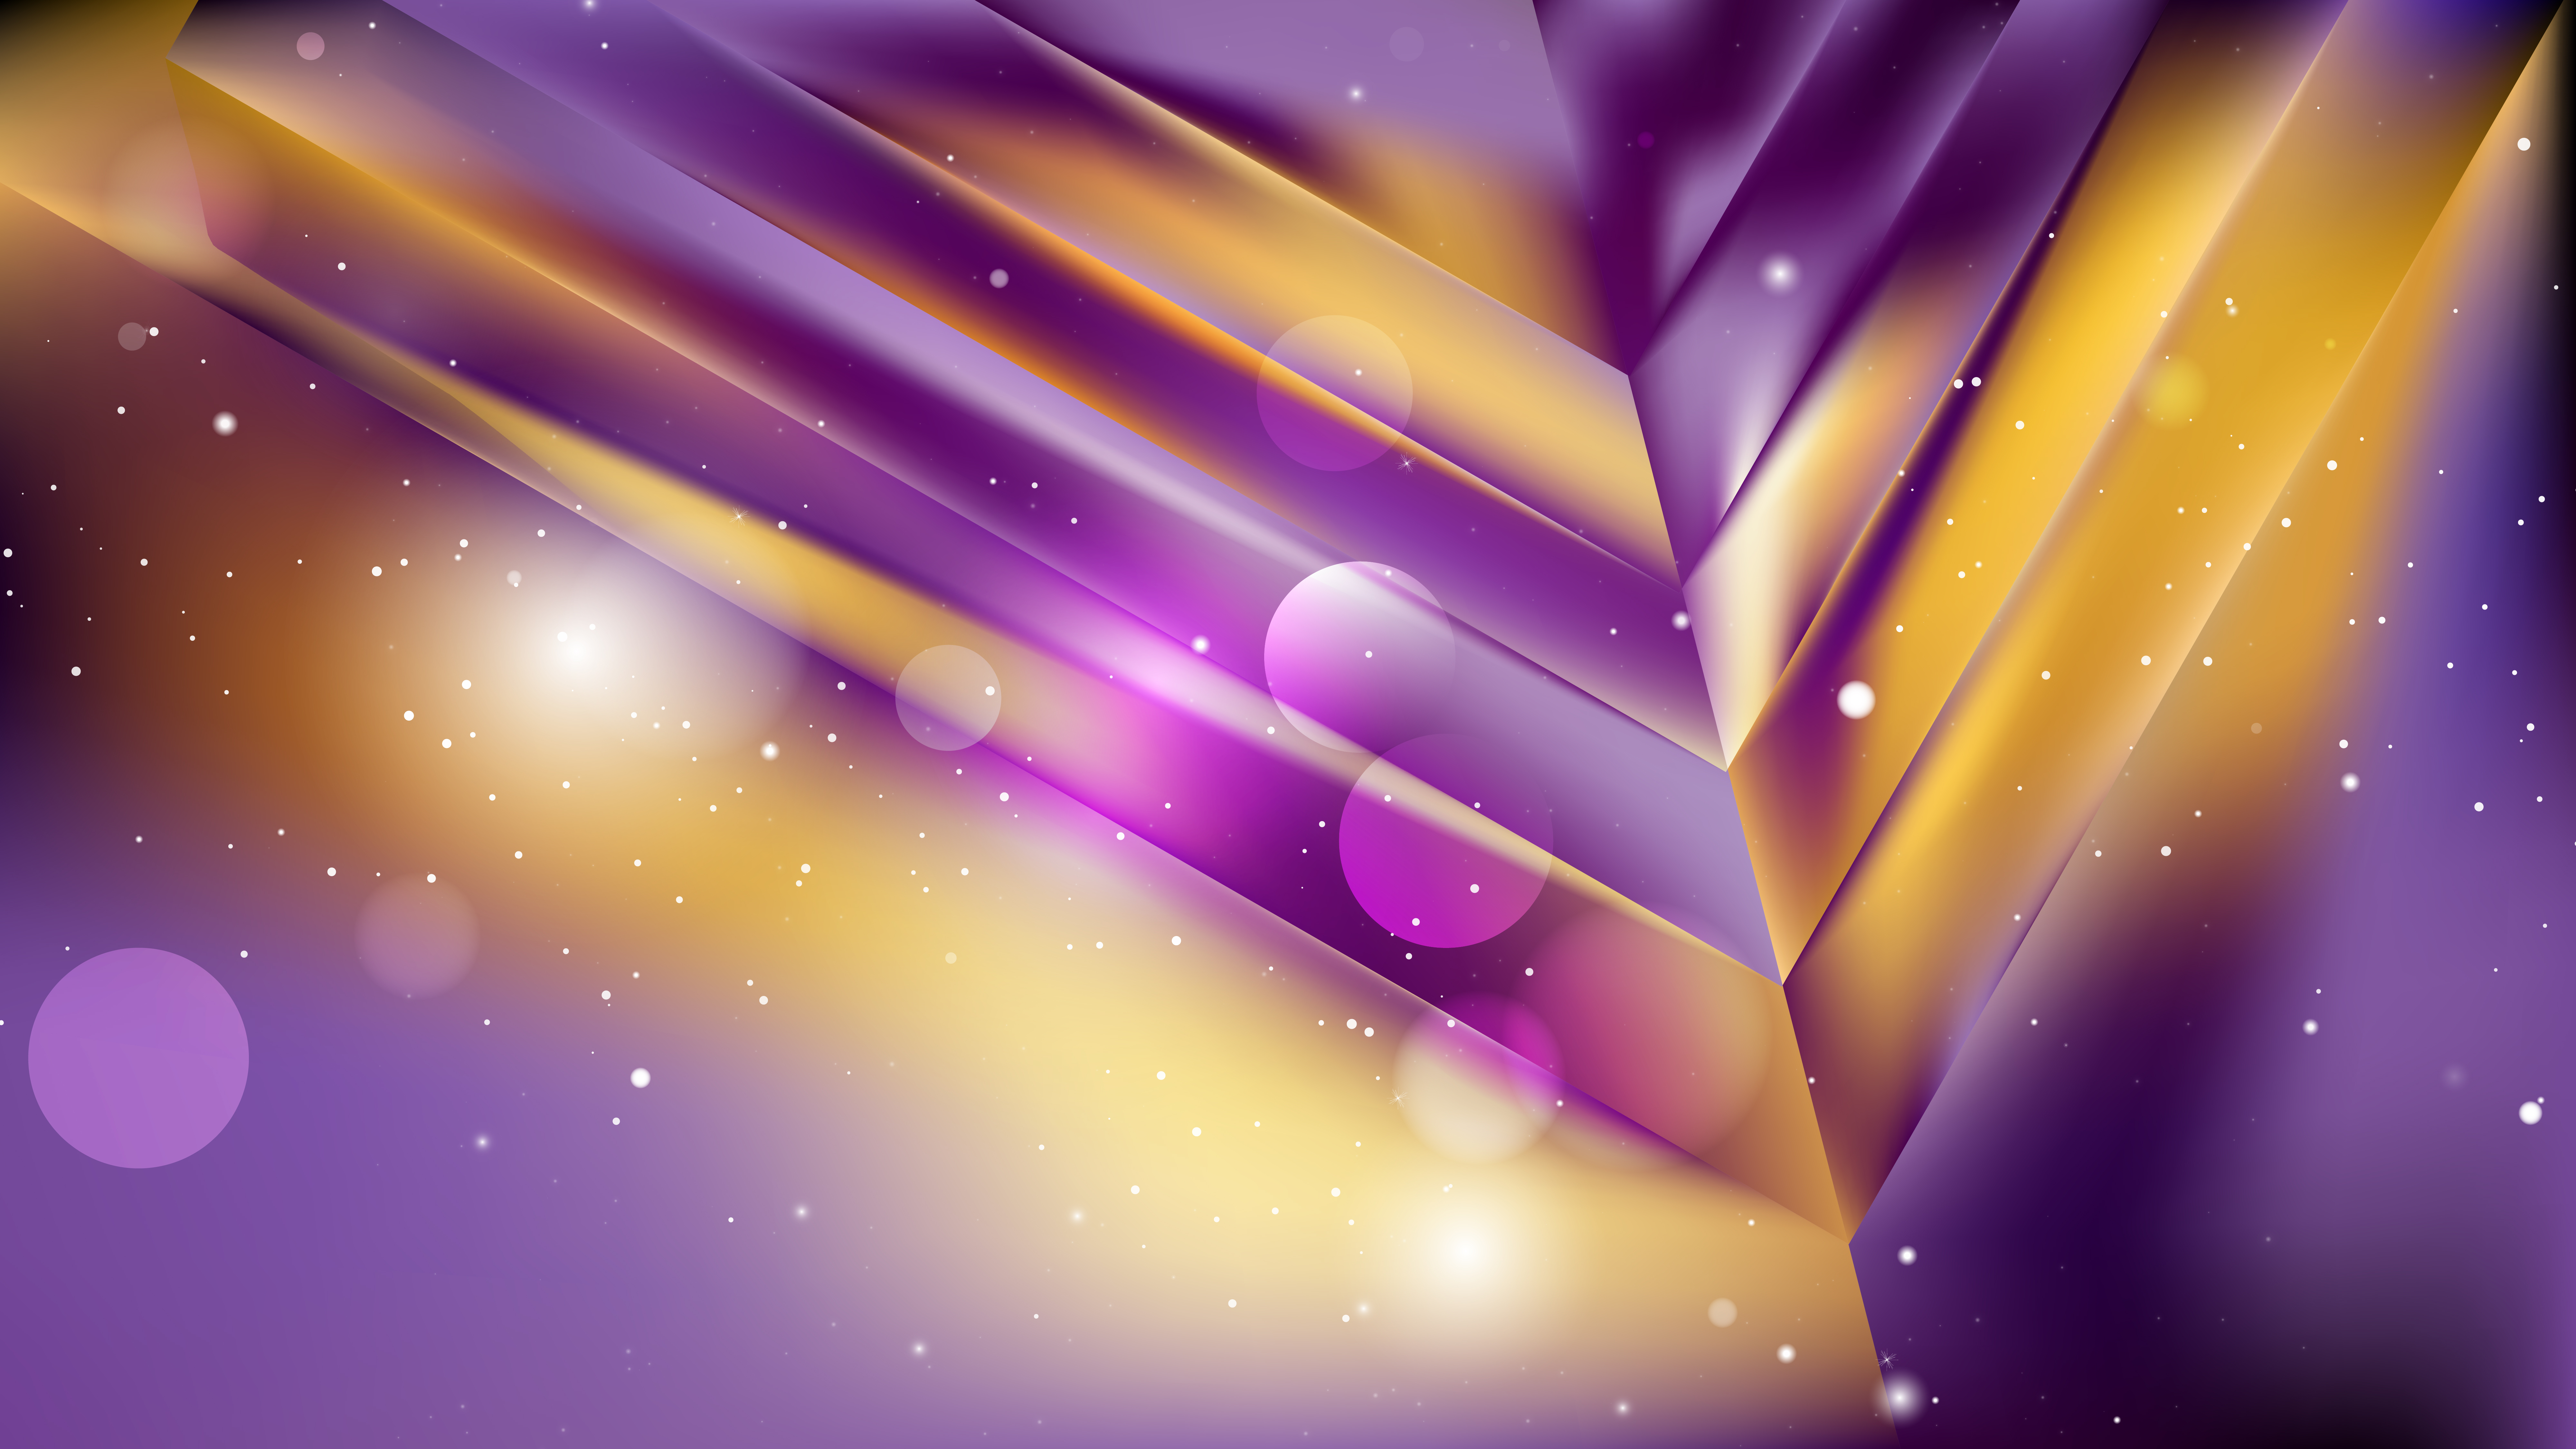 purple and gold shiny metallic background on purple and gold wallpapers